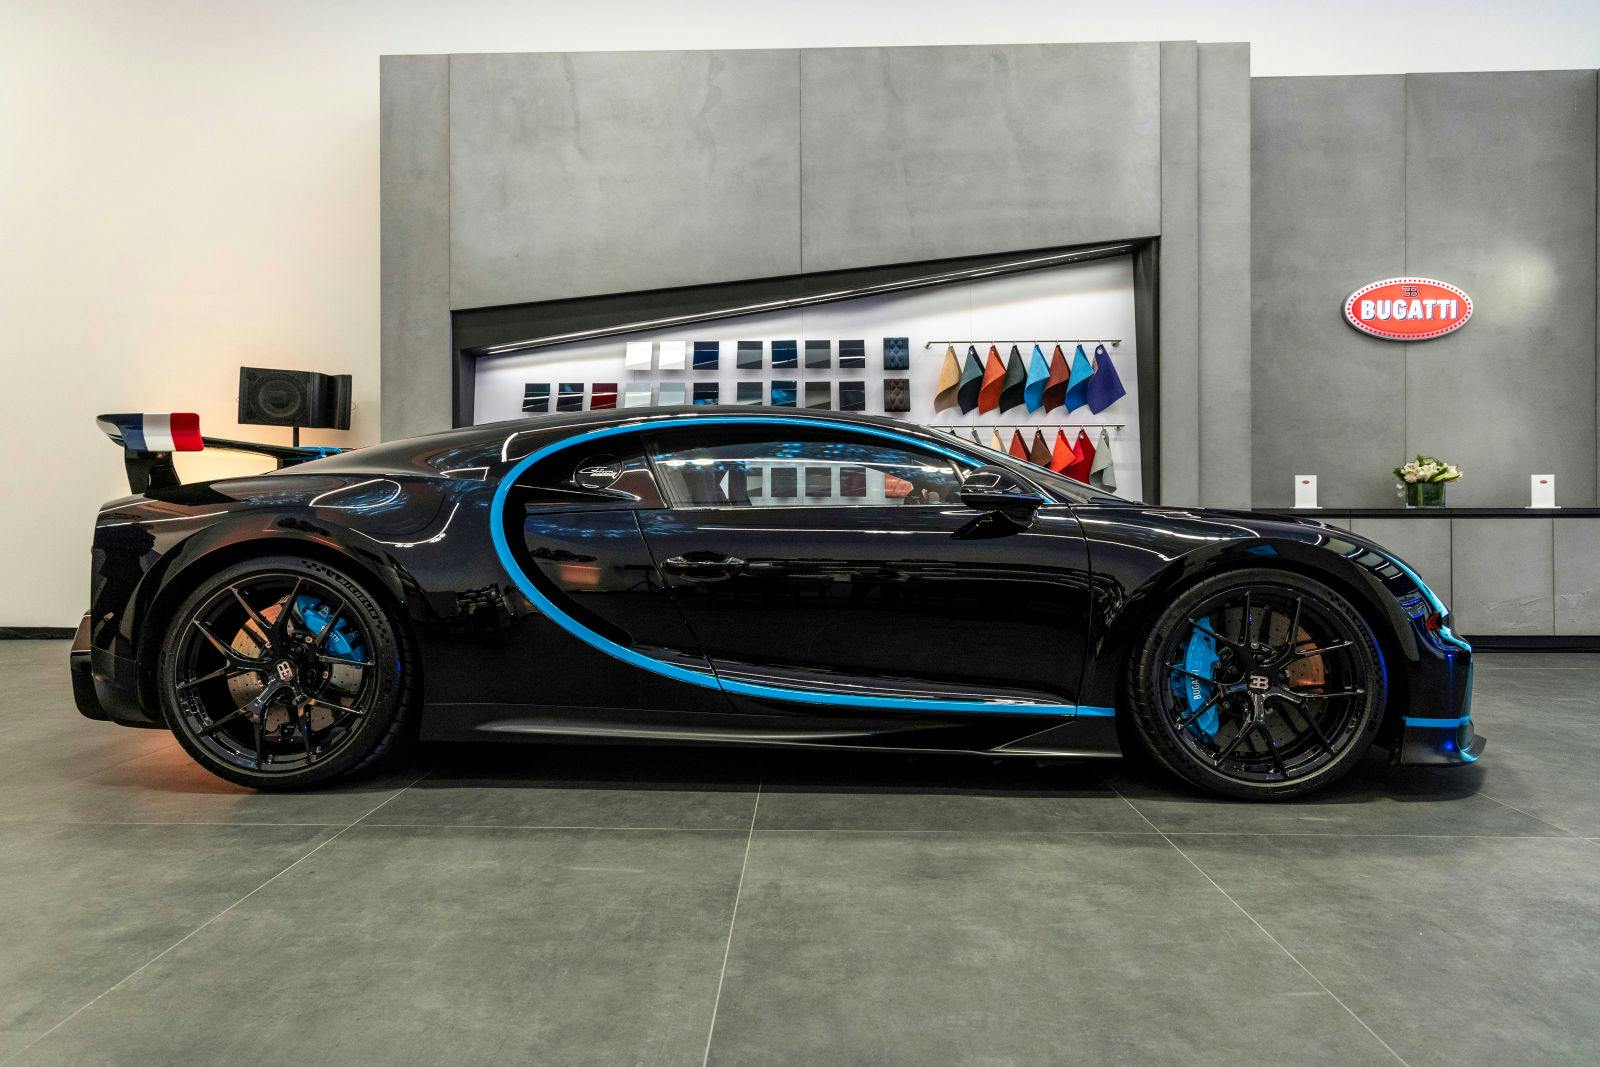 Bugatti opens his new middle eastern showroom in Riyadh, in partnership with SAMACO Automotive.